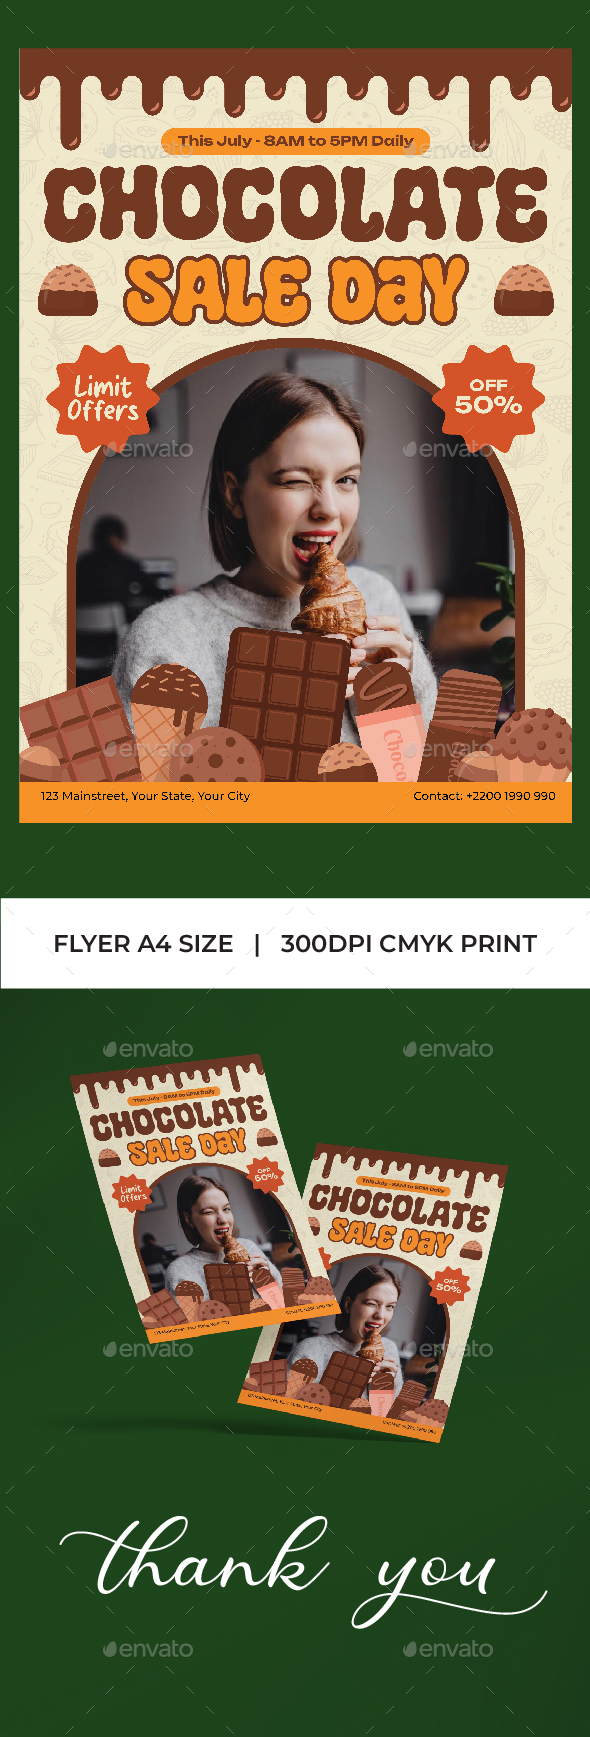 [DOWNLOAD]World Chocolate Day Flyer